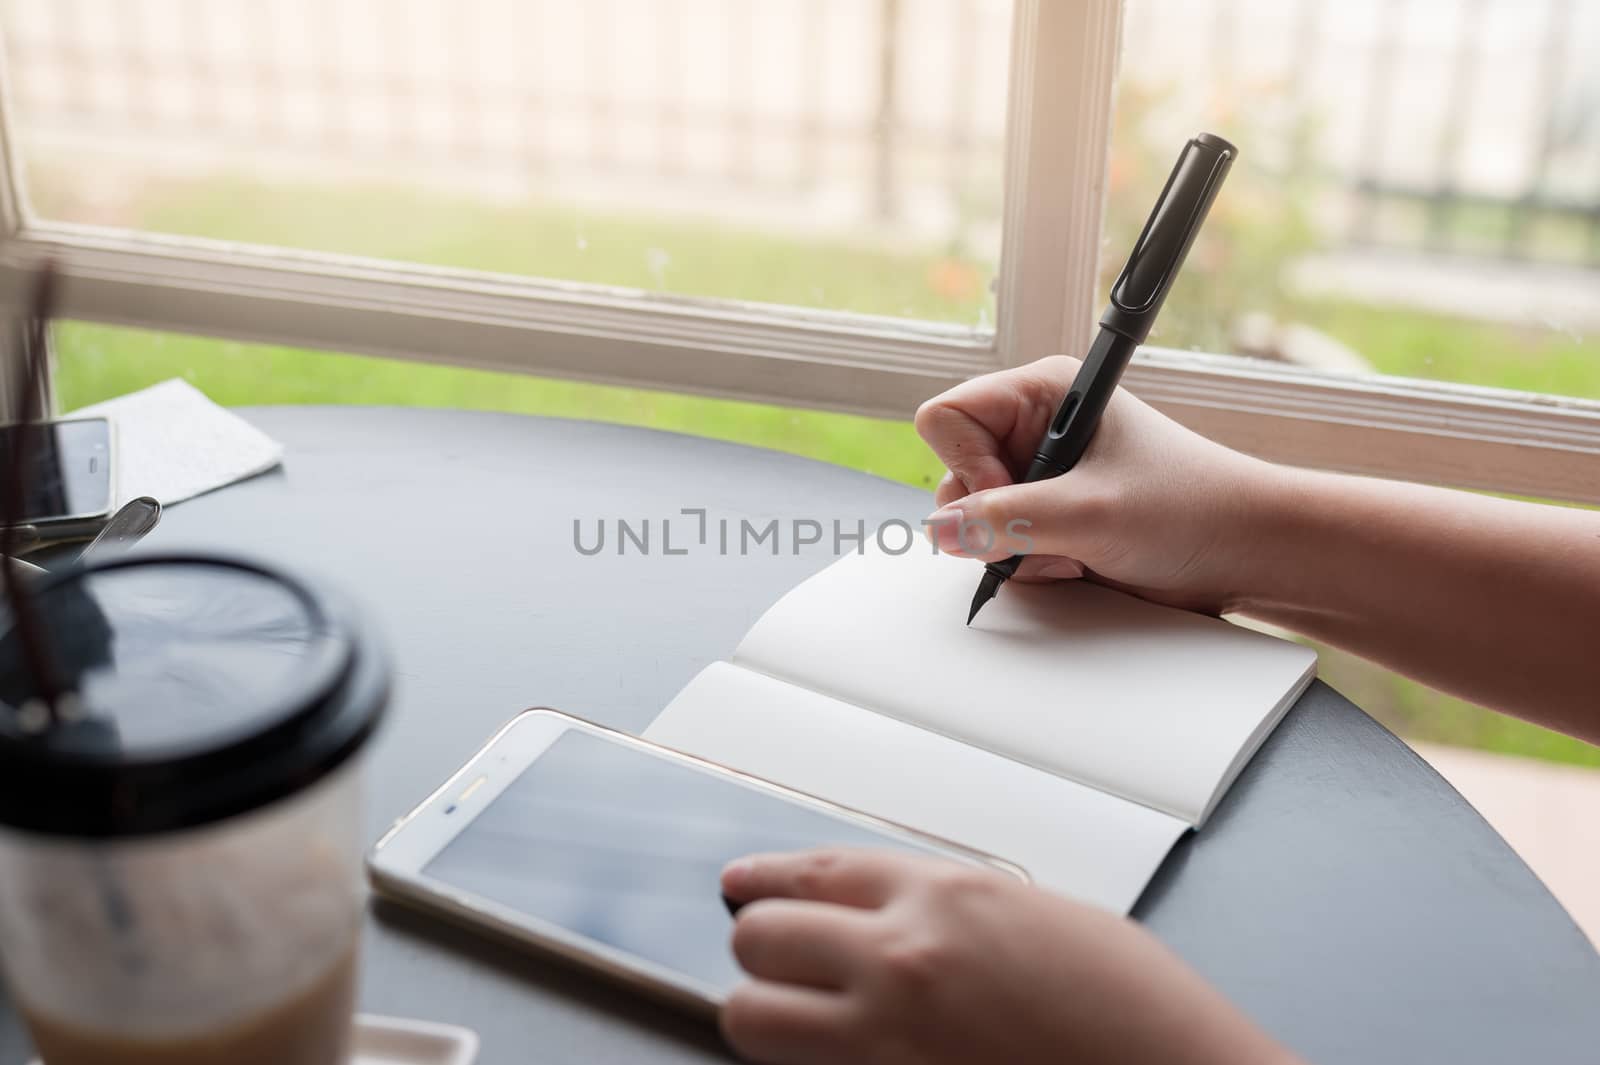 Woman hand writing a note on notebook while another hand touching on smartphone screen on table beside window. Working from anywhere concept